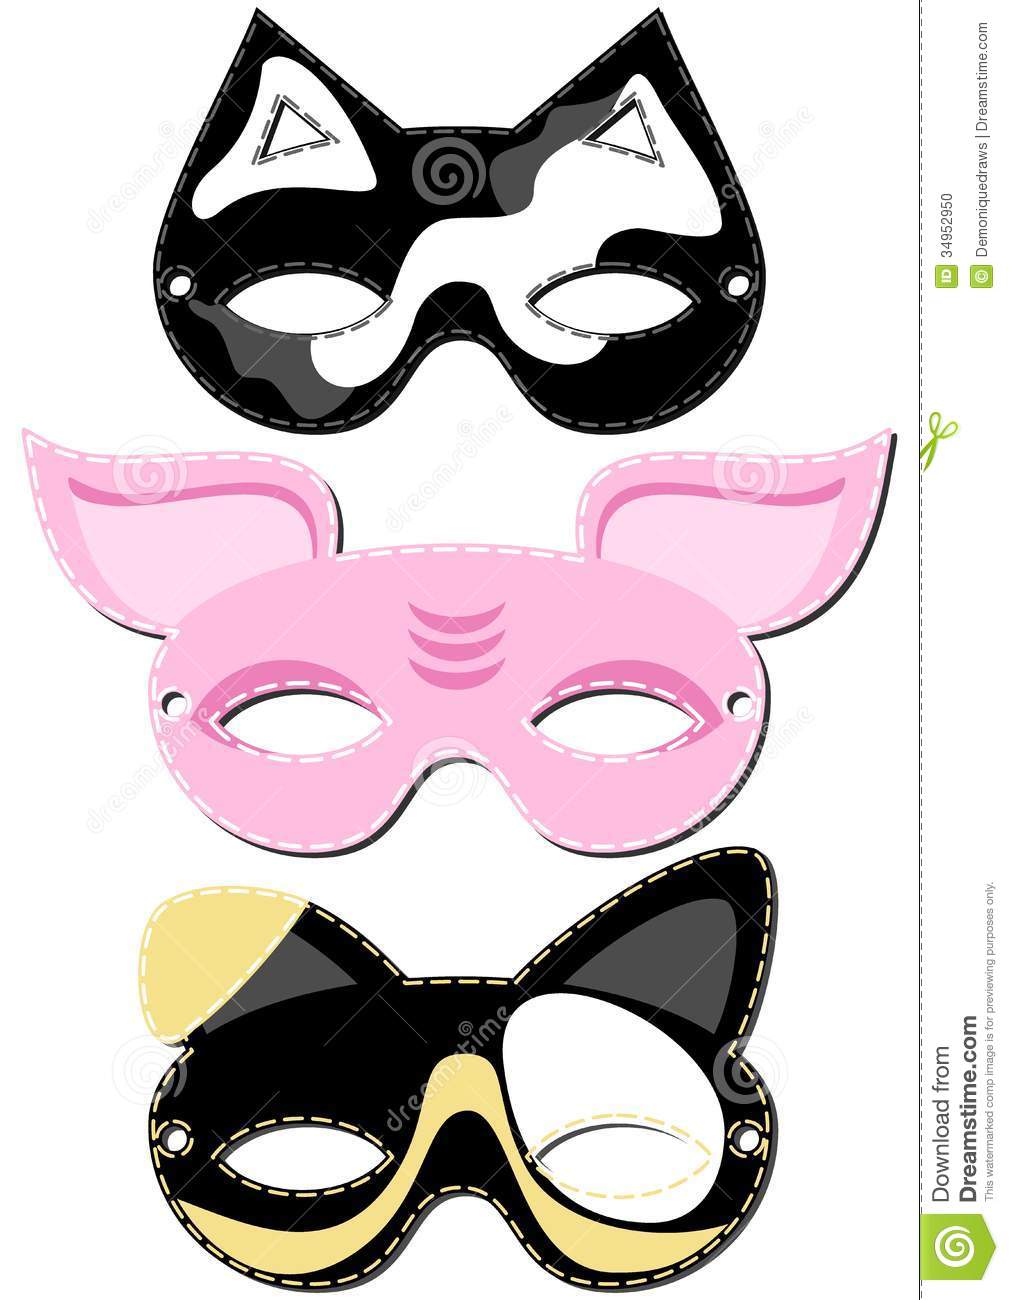 Dog Cat Pig Mask Animal Party Disguise Set Isolated Elements On White